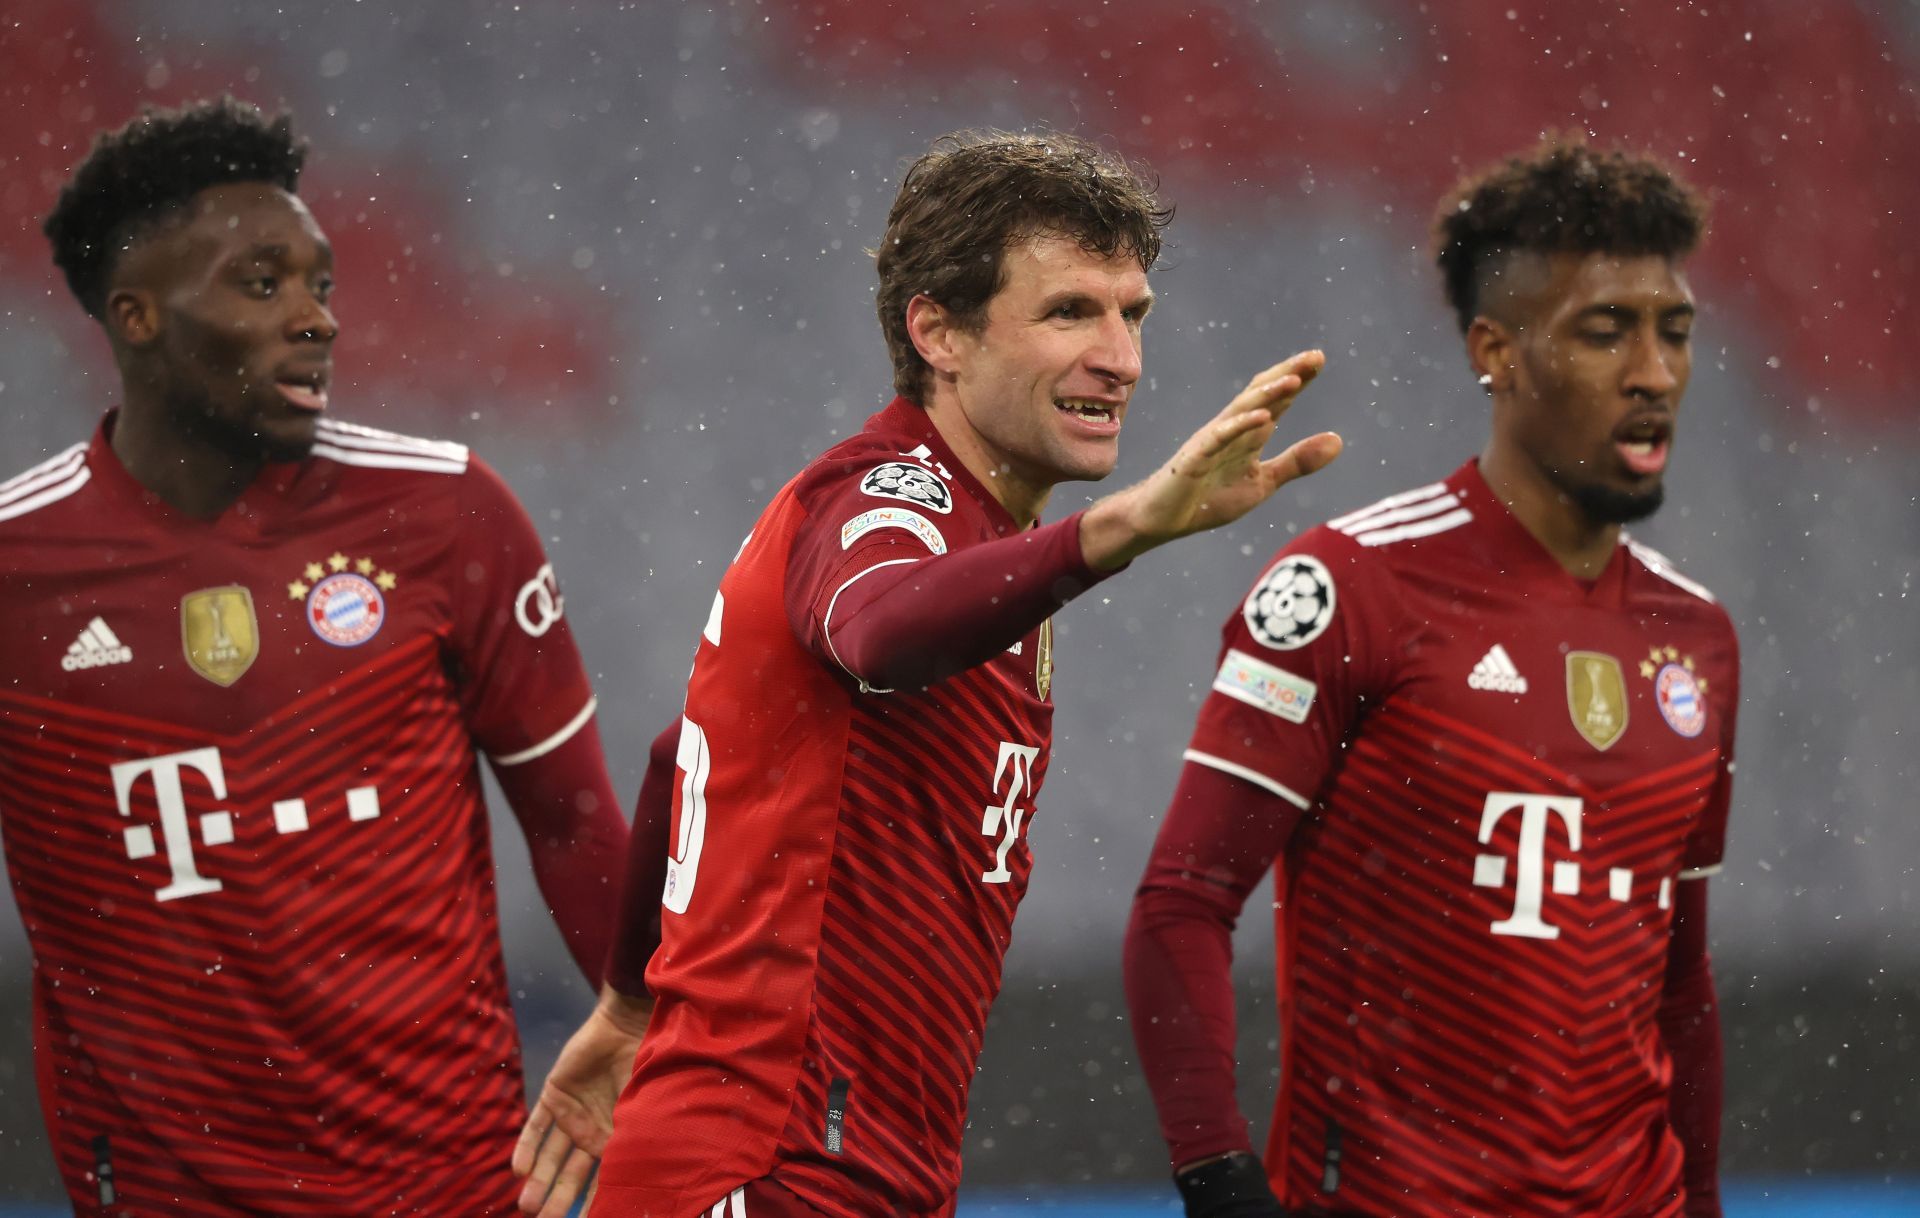 Bayern Munich romped home to a comfortable victory over Barcelona.